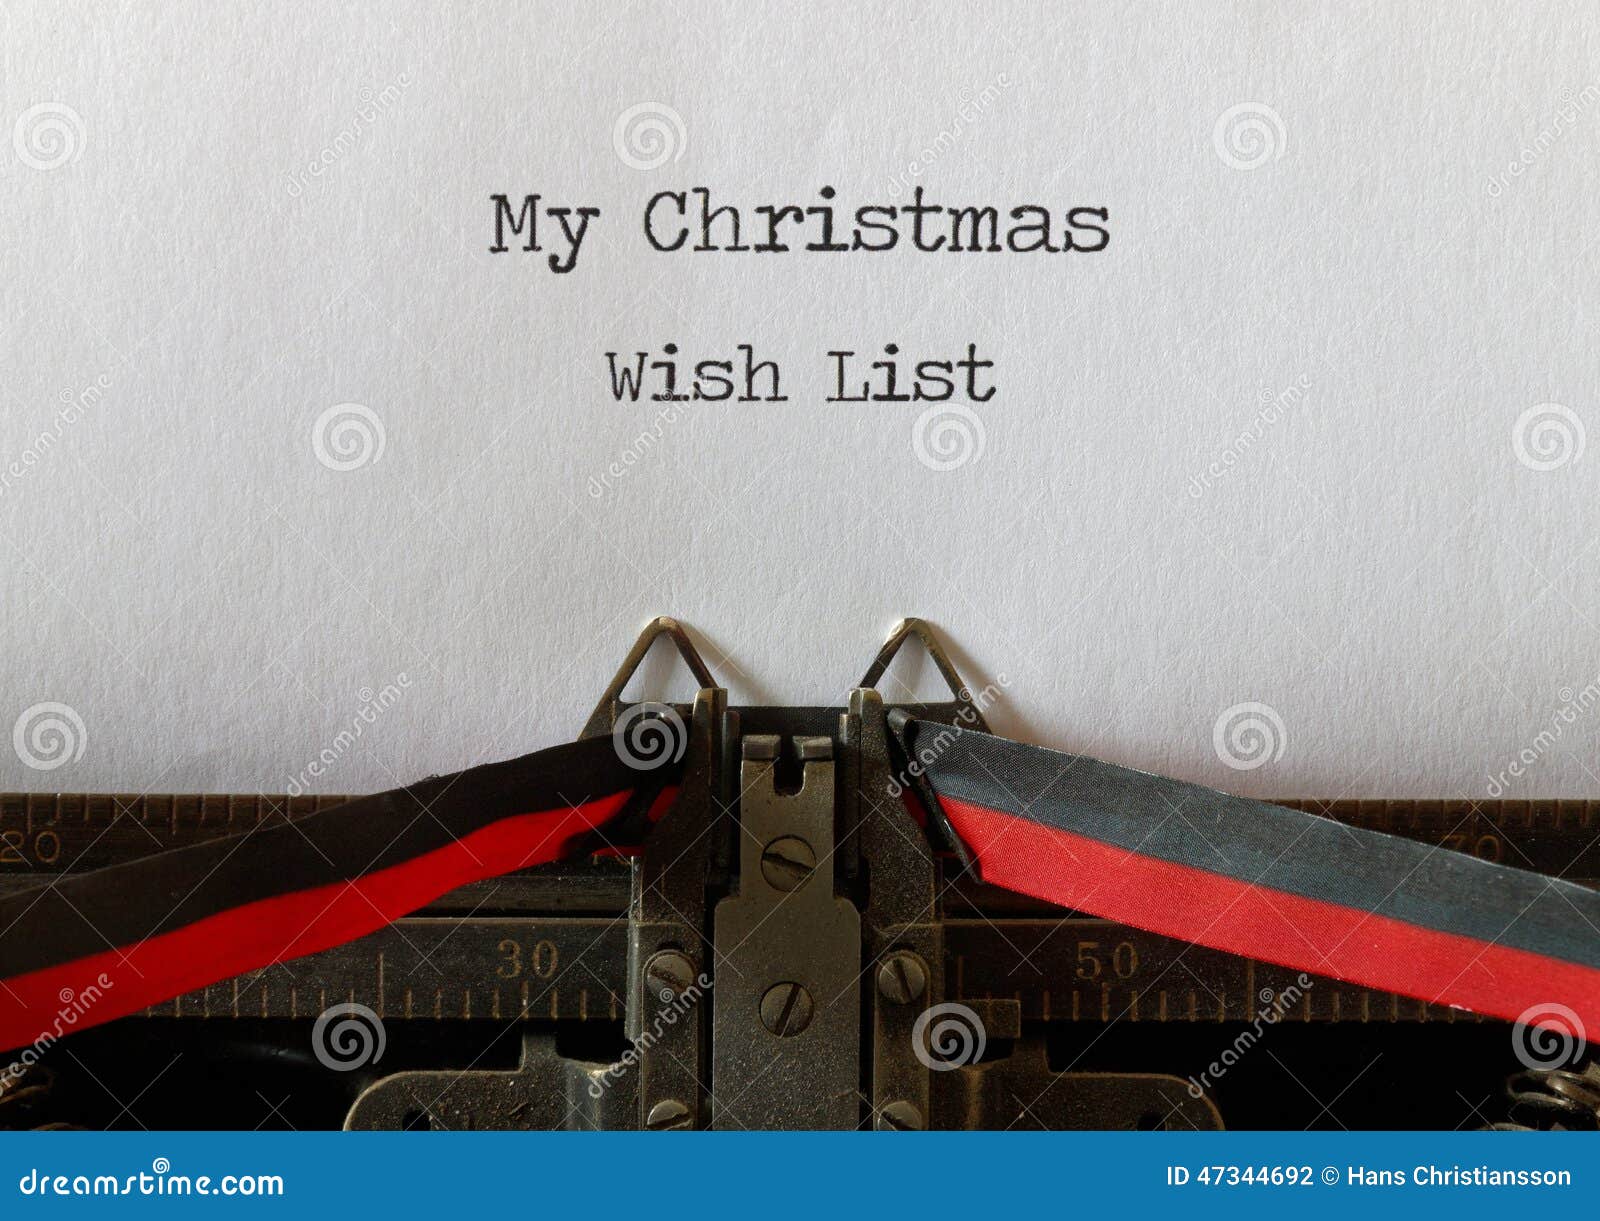 my christmas wish list, old style